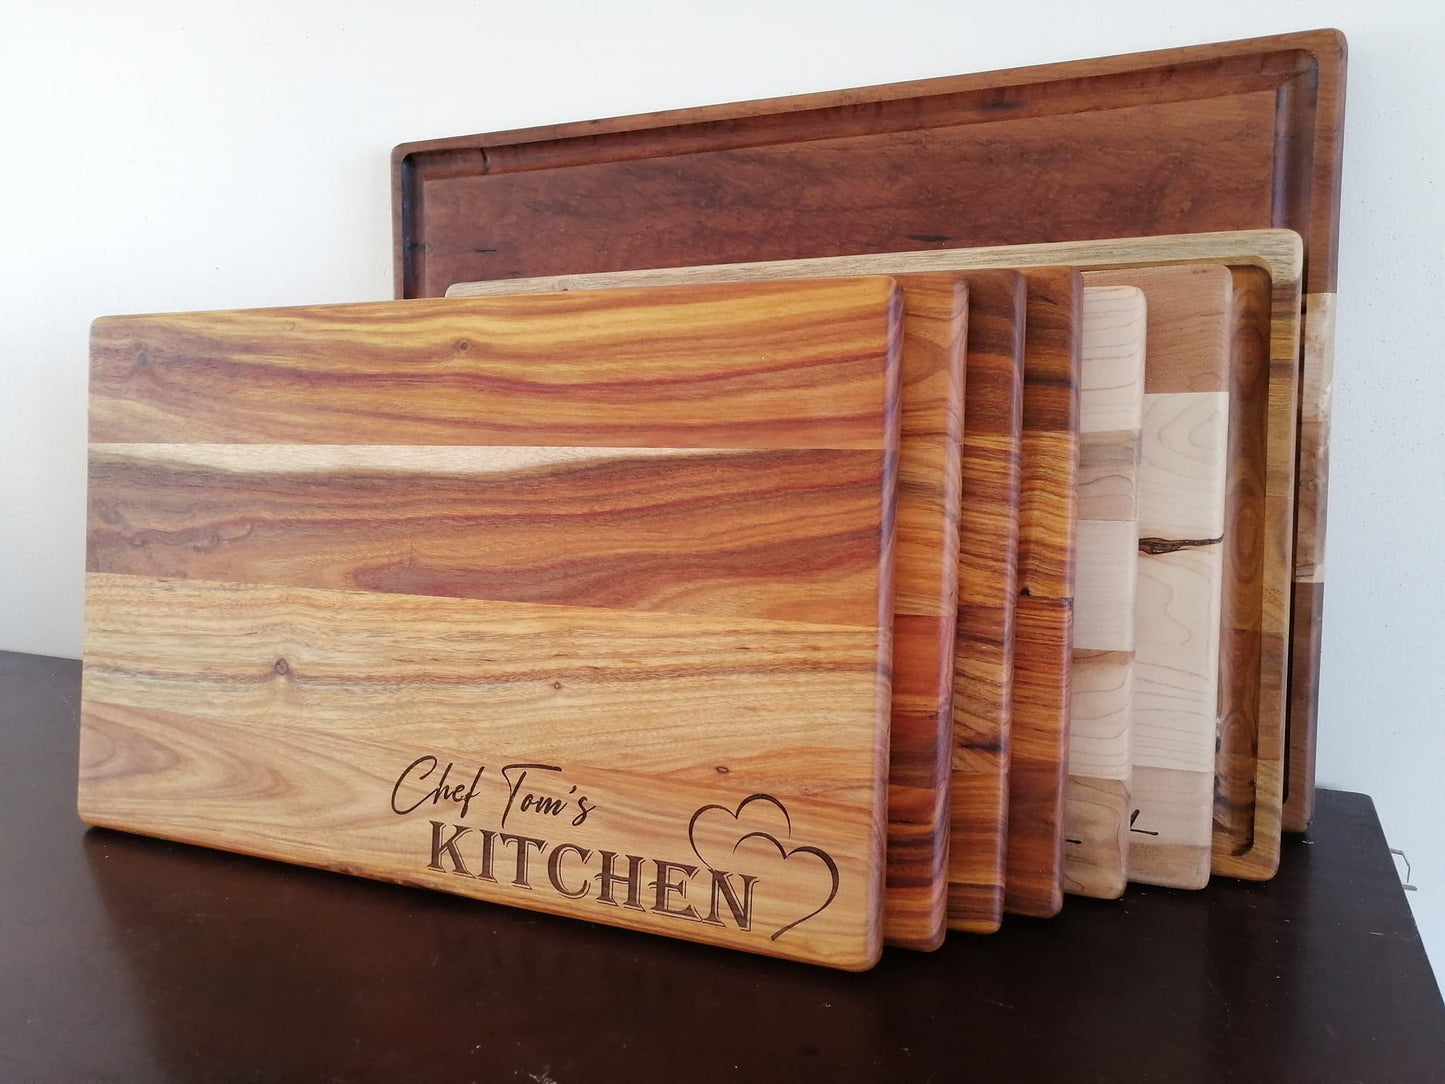 SOLD OUT Engravable Exotic Wood Cutting Board